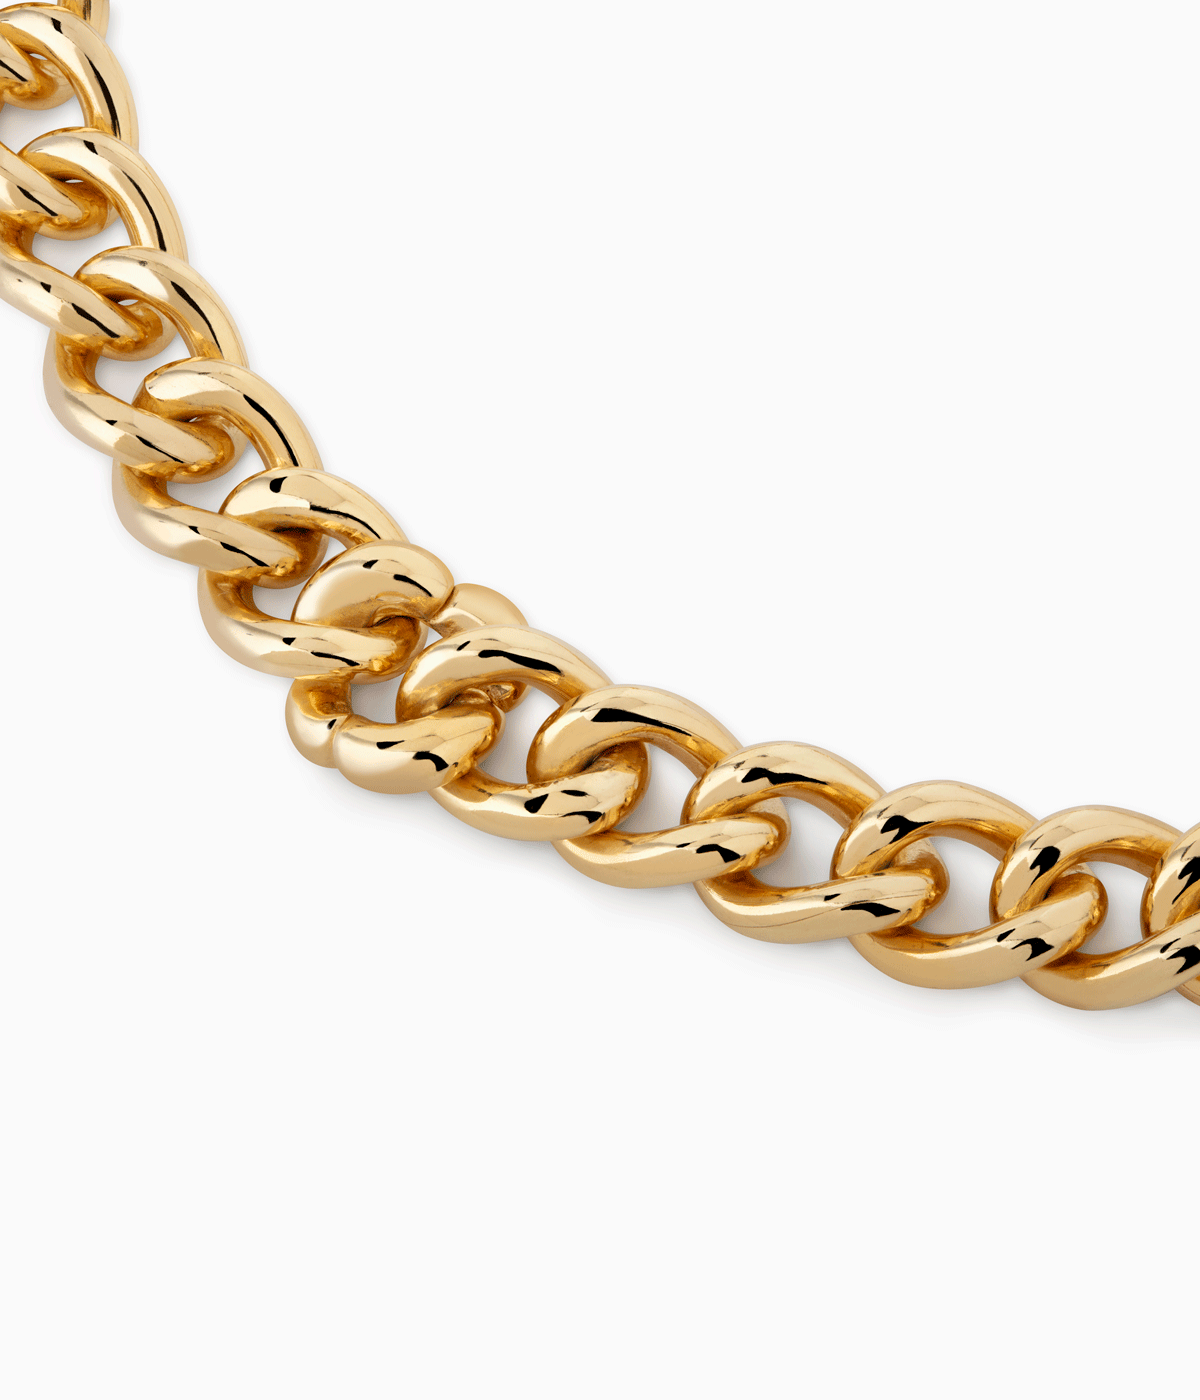 gold link chains